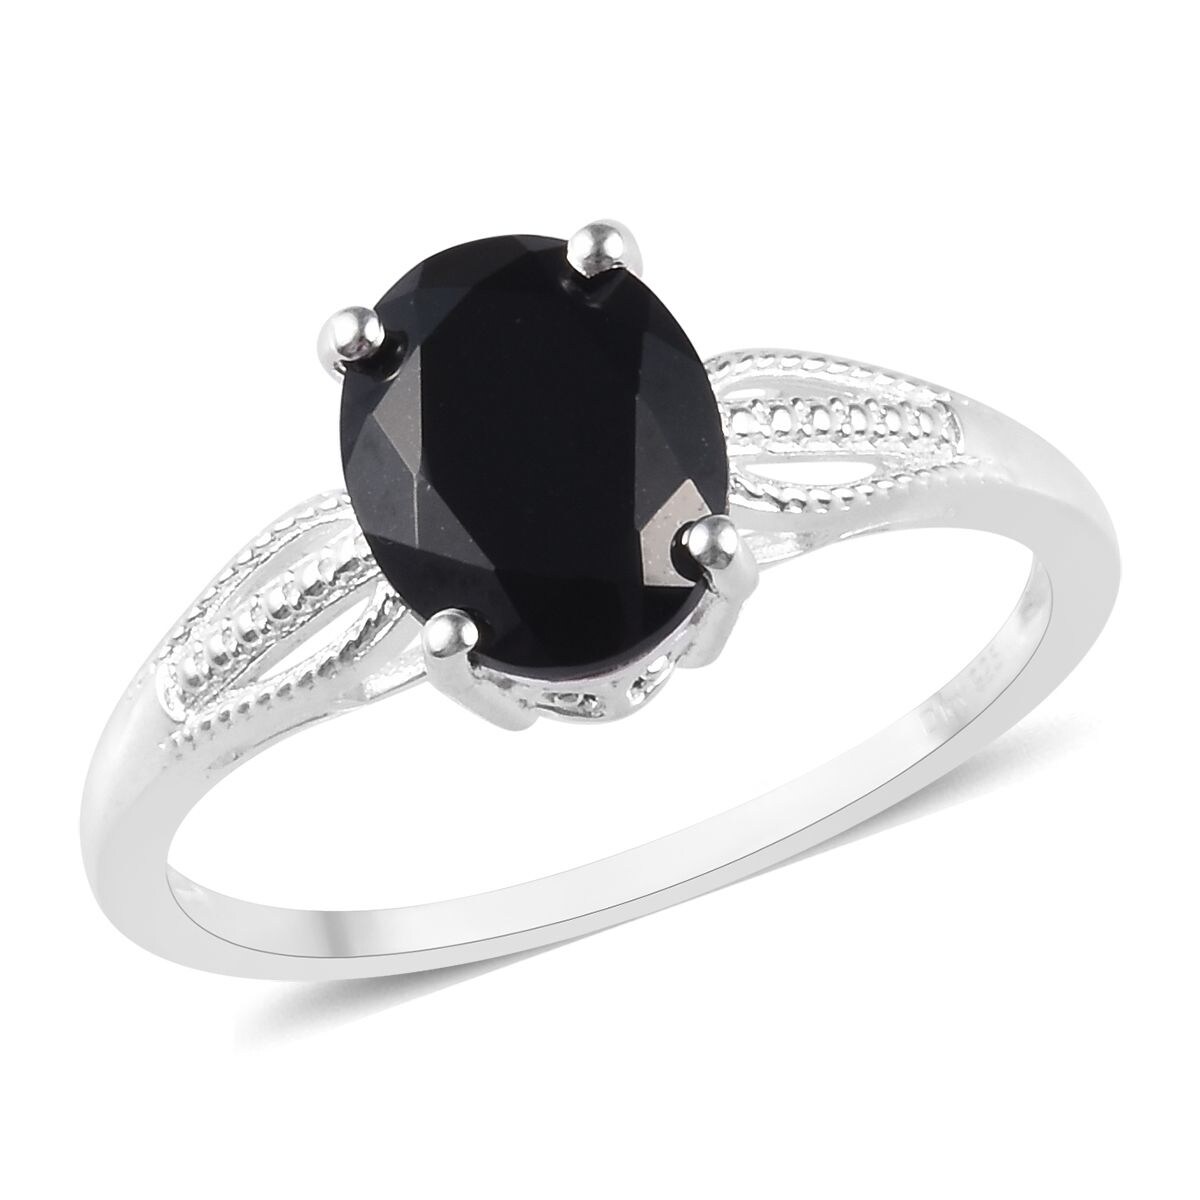 Solitaire Ring 925 Sterling Silver Cushion Shungite Jewelry for Women Size 8 Ct 2.1